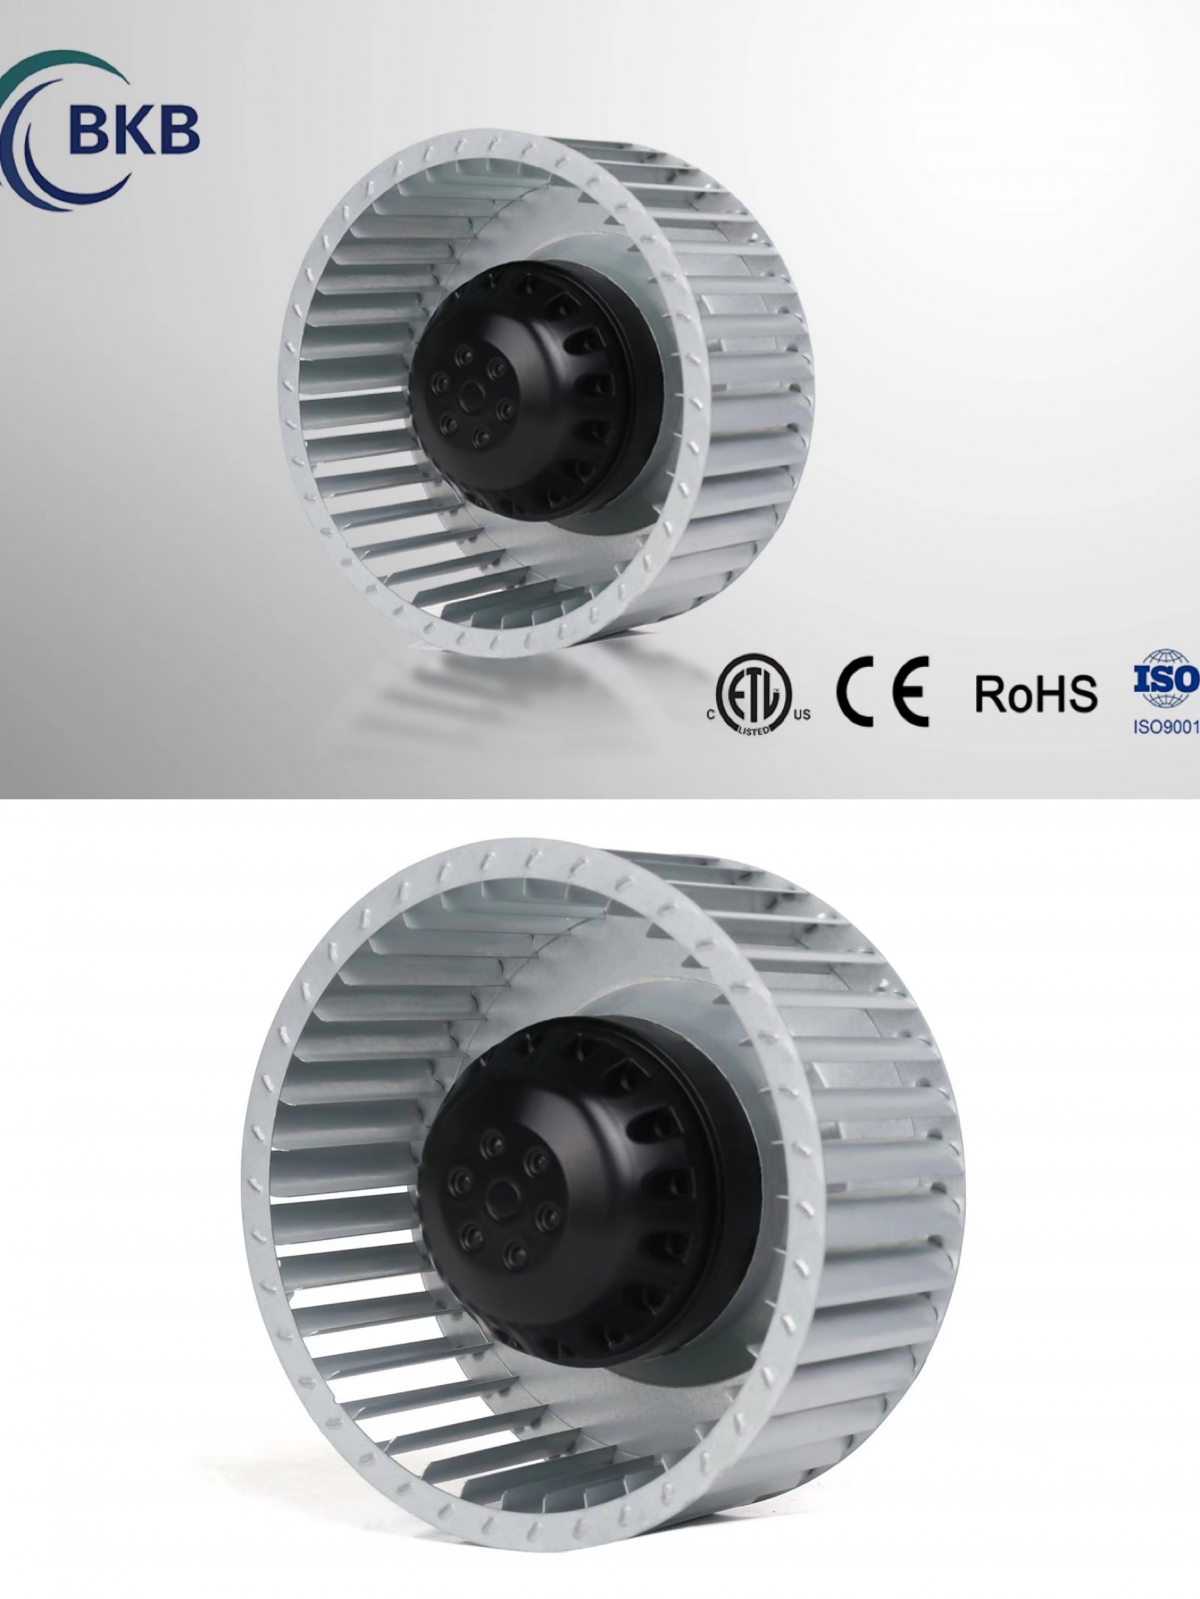 The Characteristics of Forward curved centrifugal fan-SUNLIGHT BLOWER,Centrifugal Fans, Inline Fans,Motors,Backward curved centrifugal fans ,Forward curved centrifugal fans ,inlet fans, EC fans